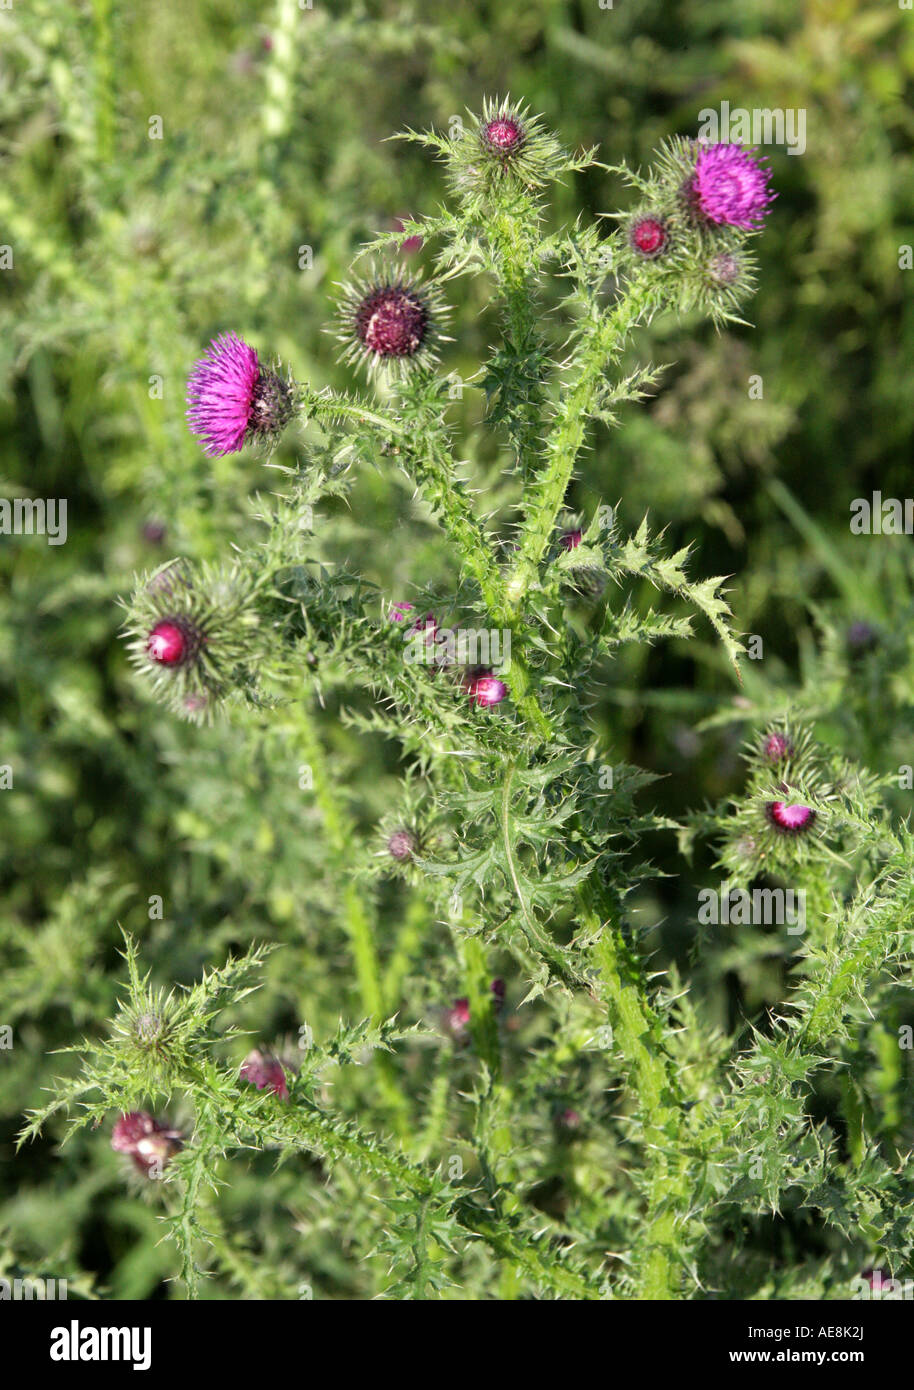 Welted Thistle, Carduus acanthoides, Asteraceae, Compositae Stock Photo